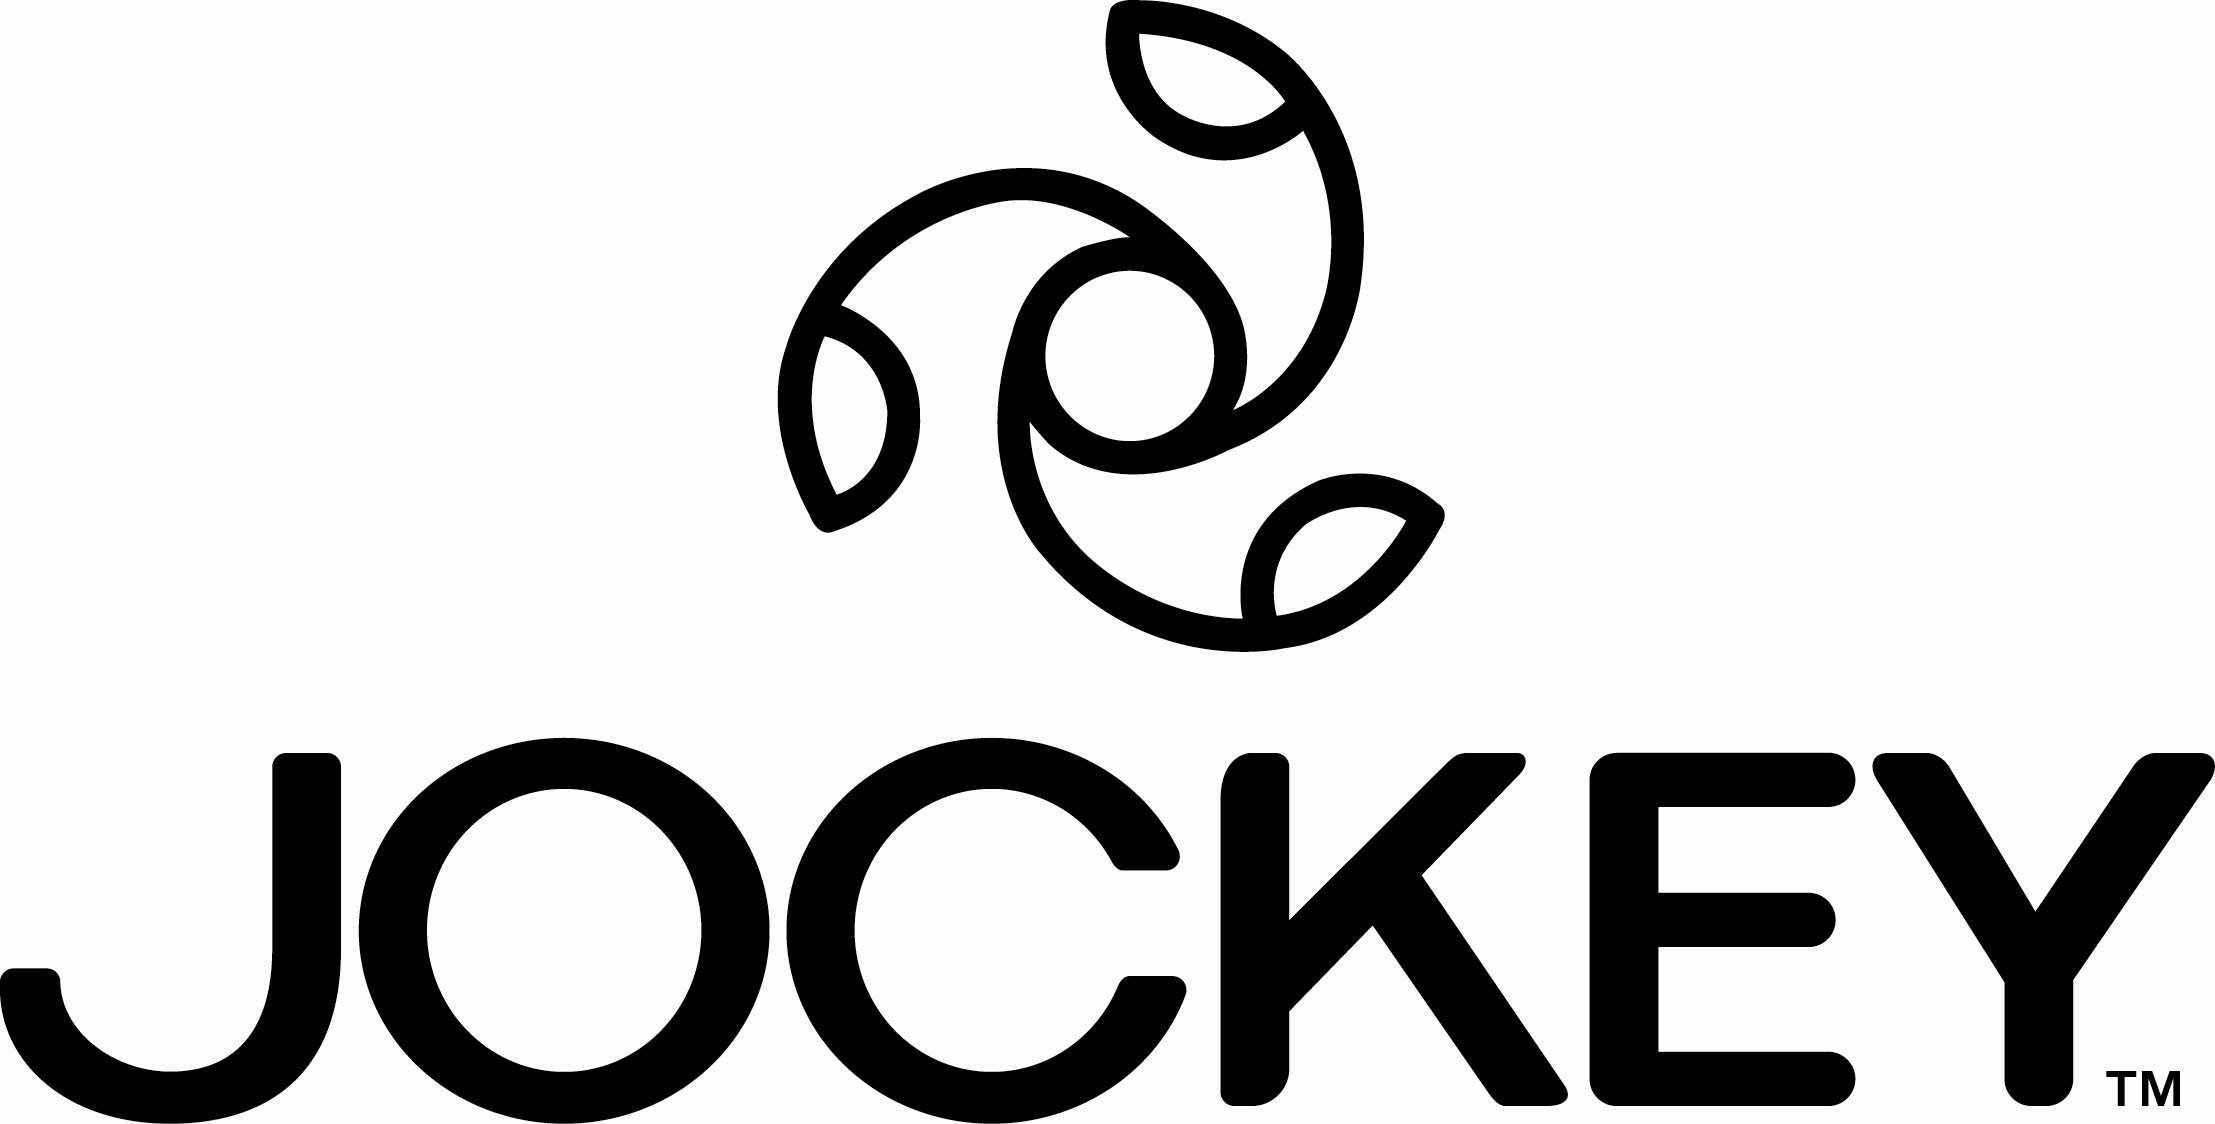 Jockey India to double production capacity by 2020, Retail News, ET Retail